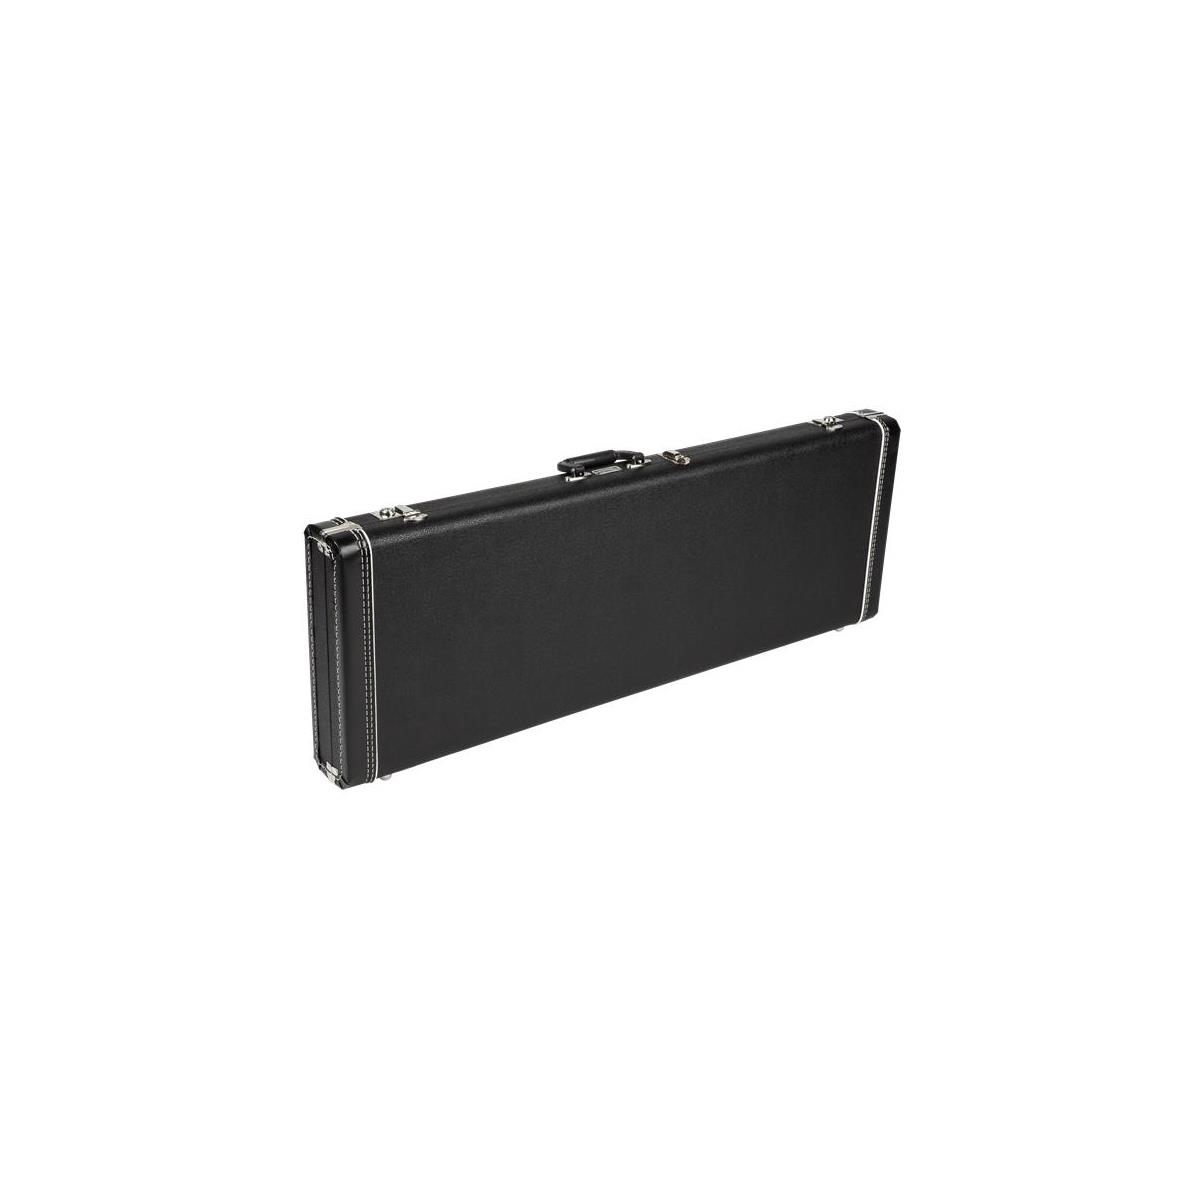 Image of Fender Standard Black Multi-Fit Case with Black Acrylic Interior